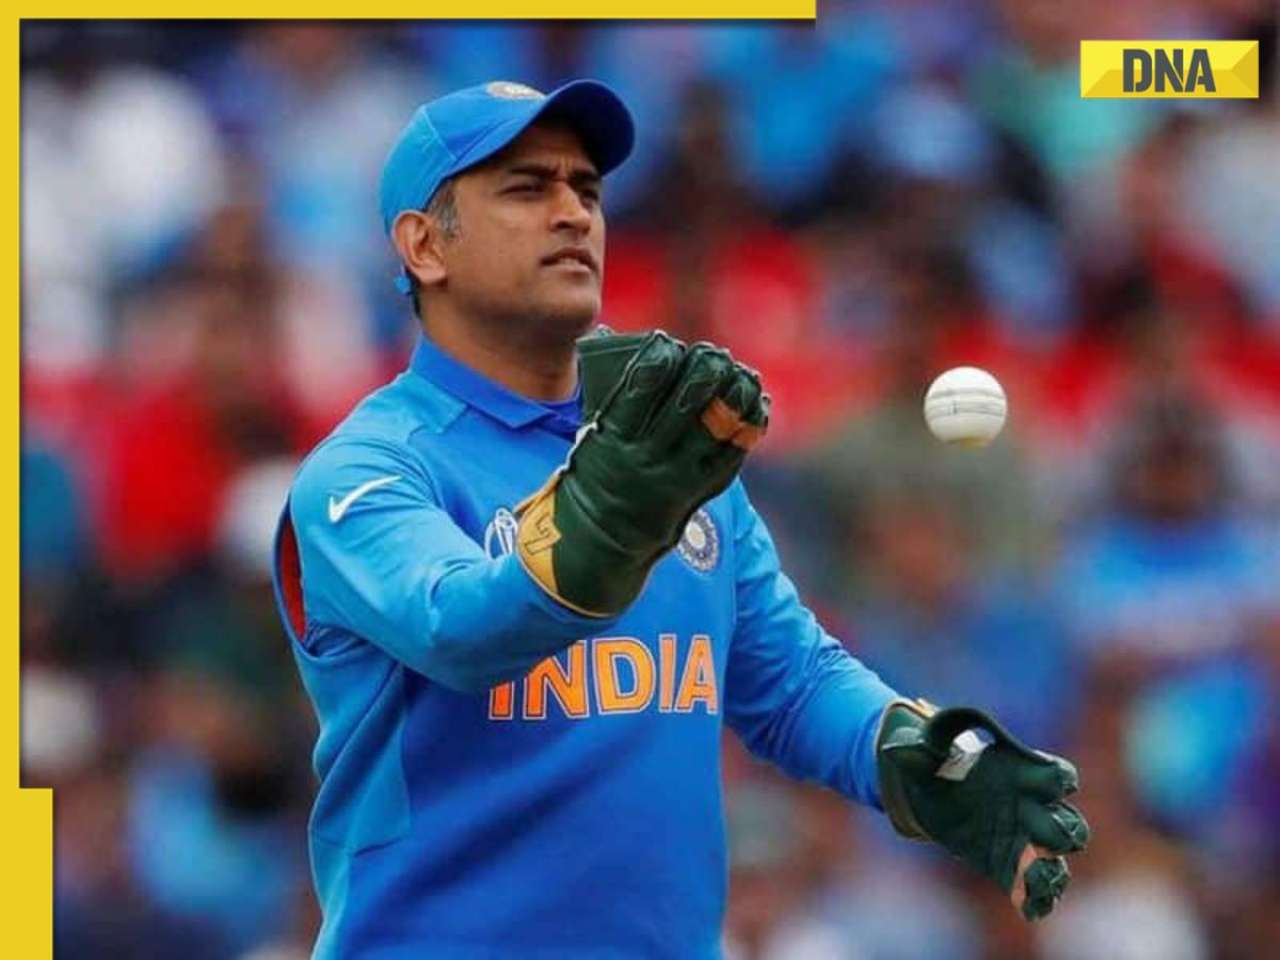 Explained: Why MS Dhoni cannot apply for India head coach job